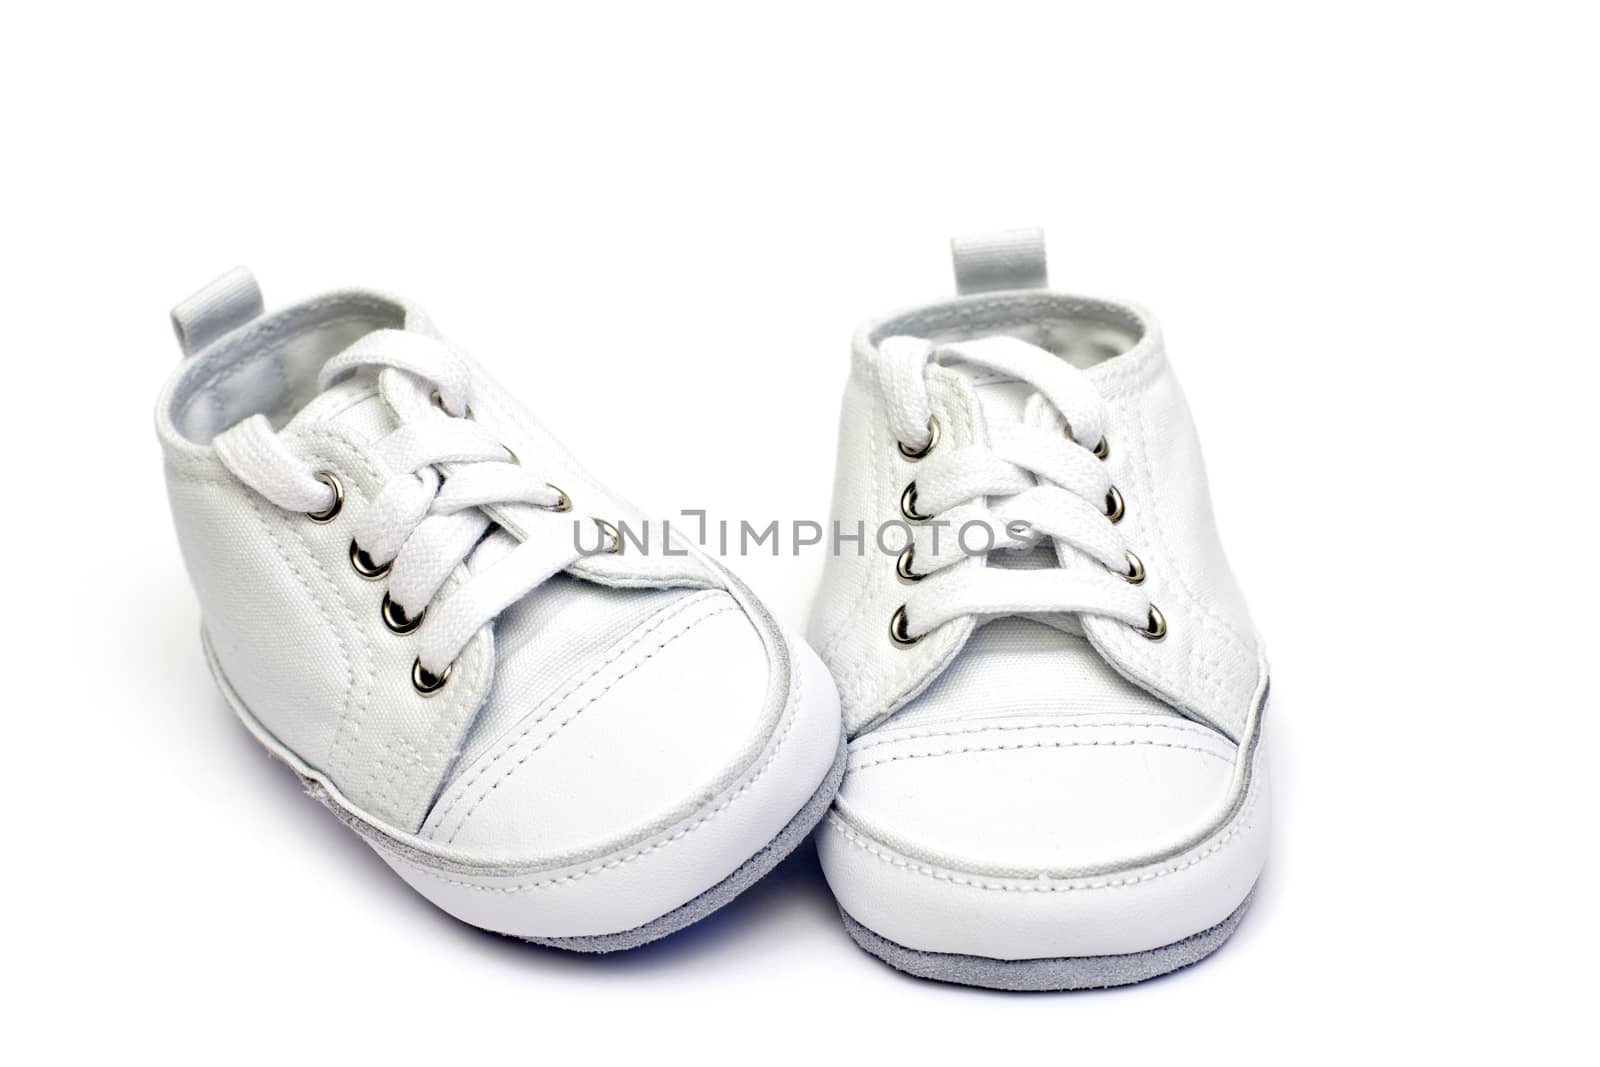 pair of white baby shoe over white